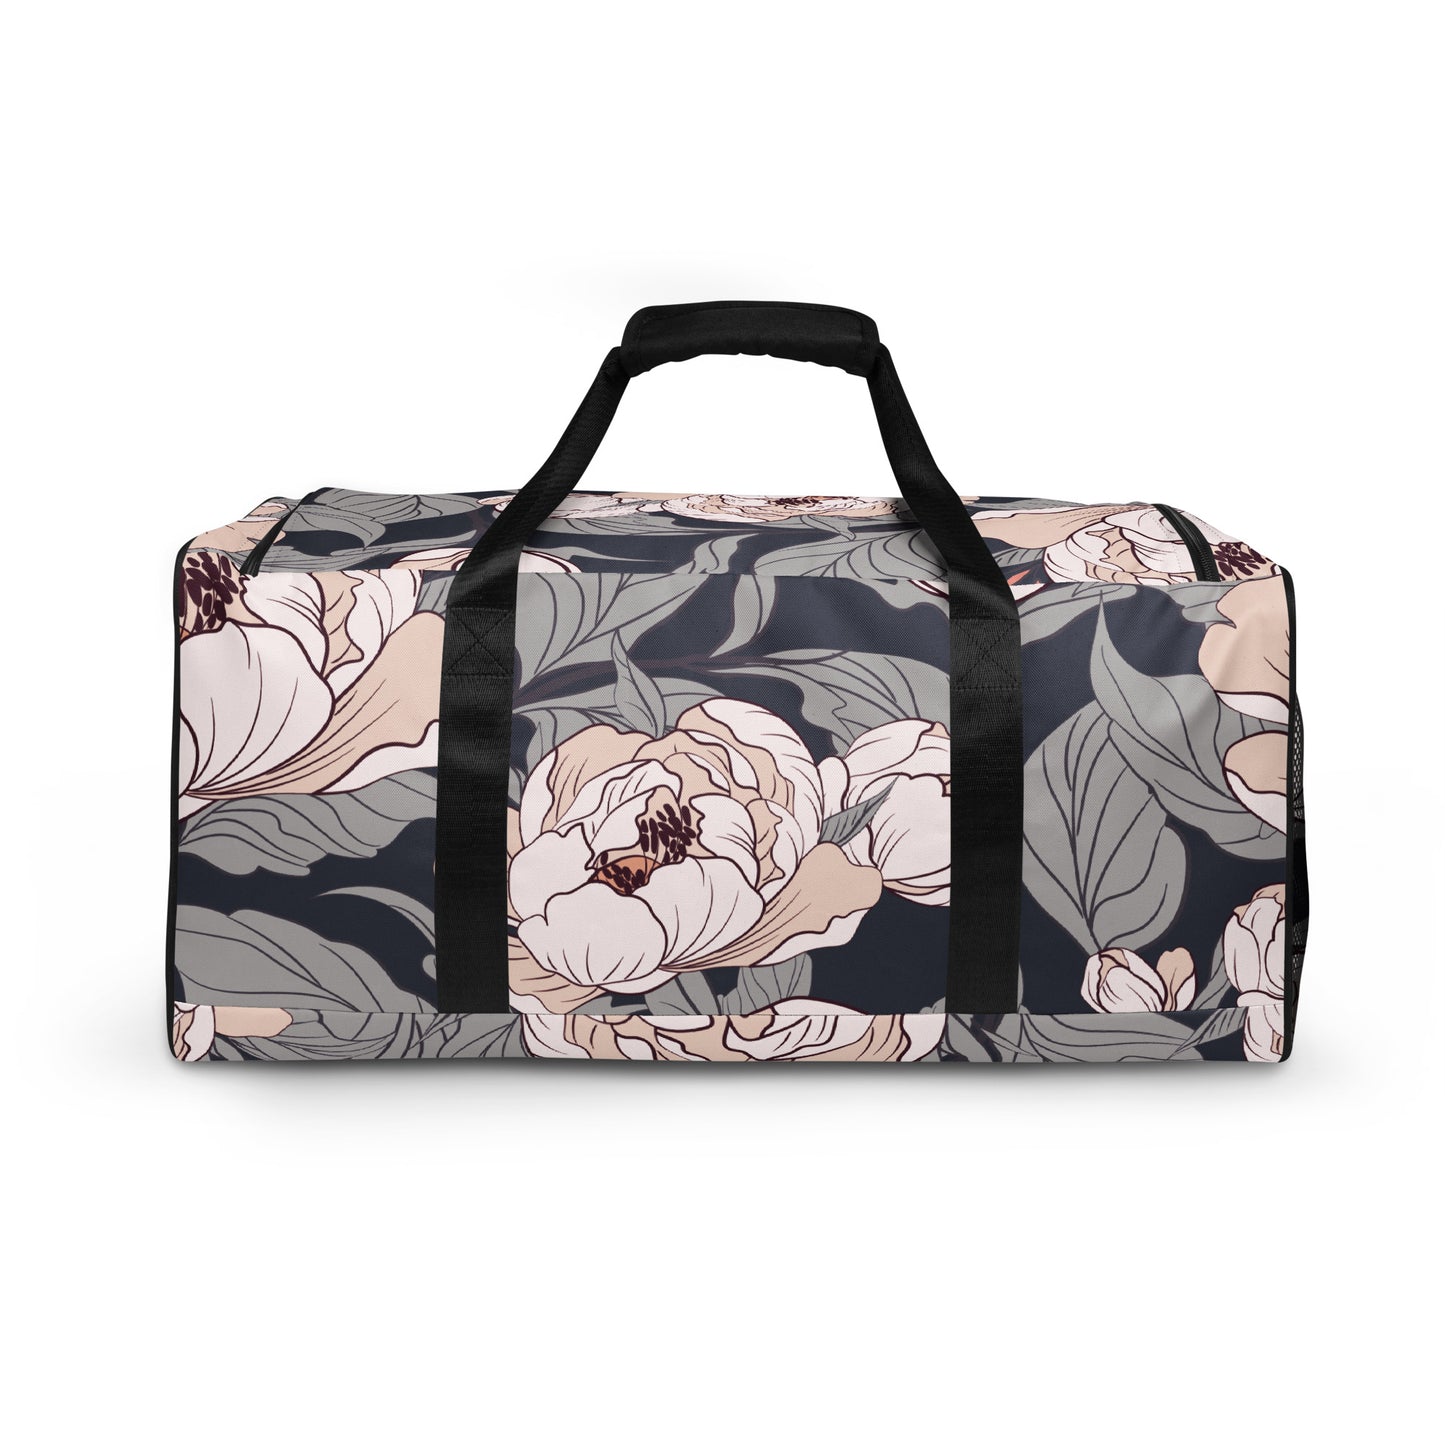 Flower Painting Artwork - Sustainably Made Duffle Bag